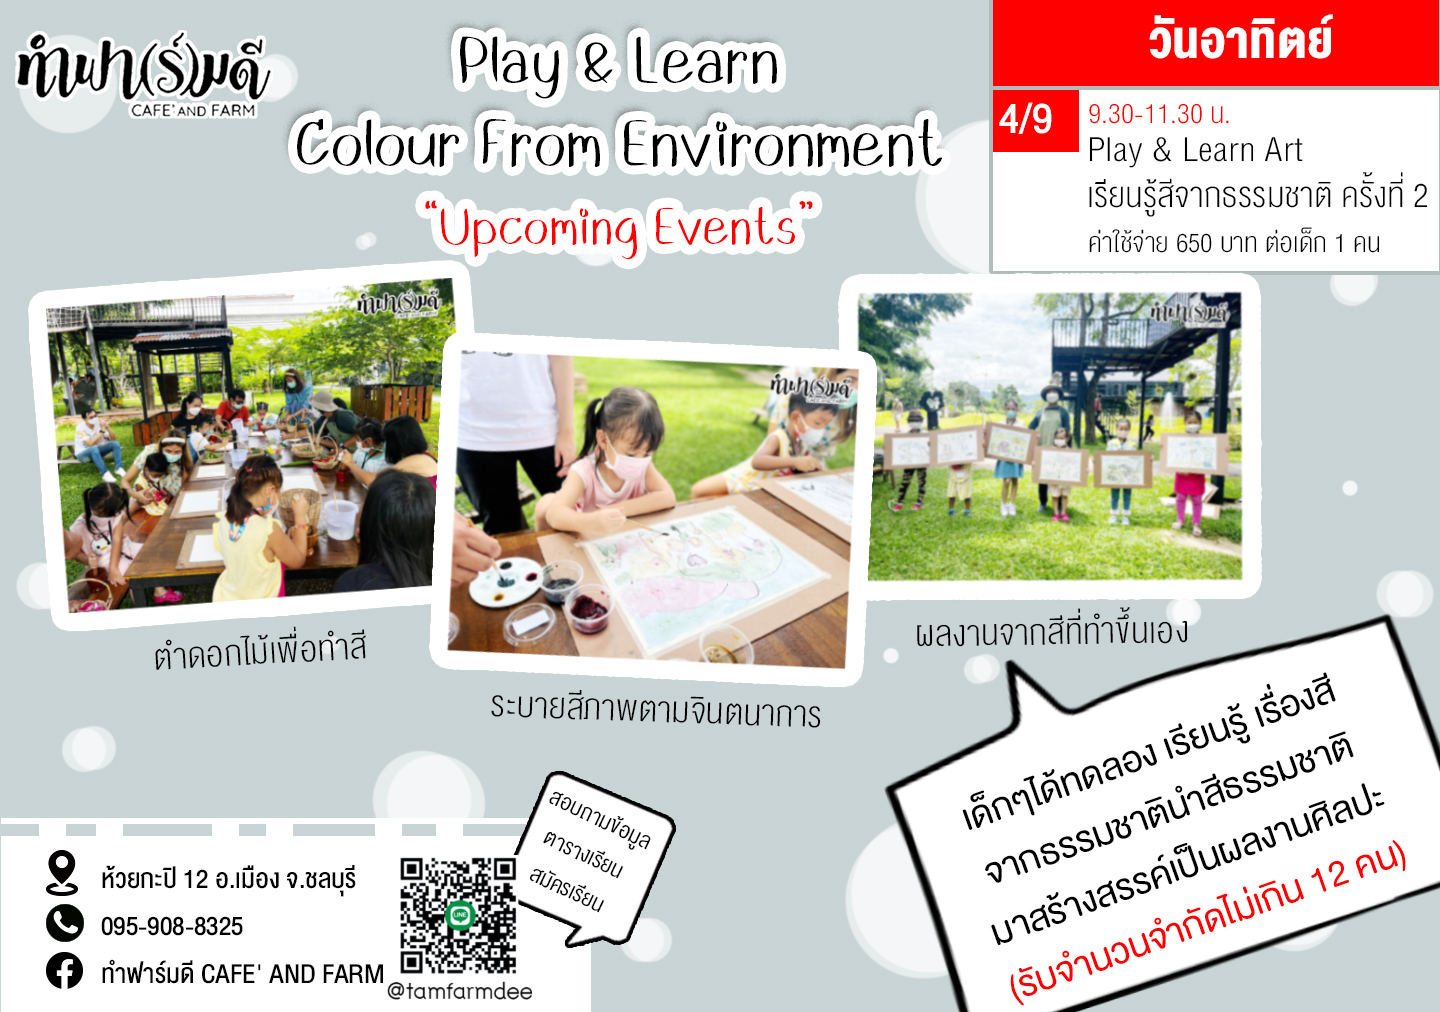 Workshop Play and Learn Colour From Environment ครั้งที่ 2